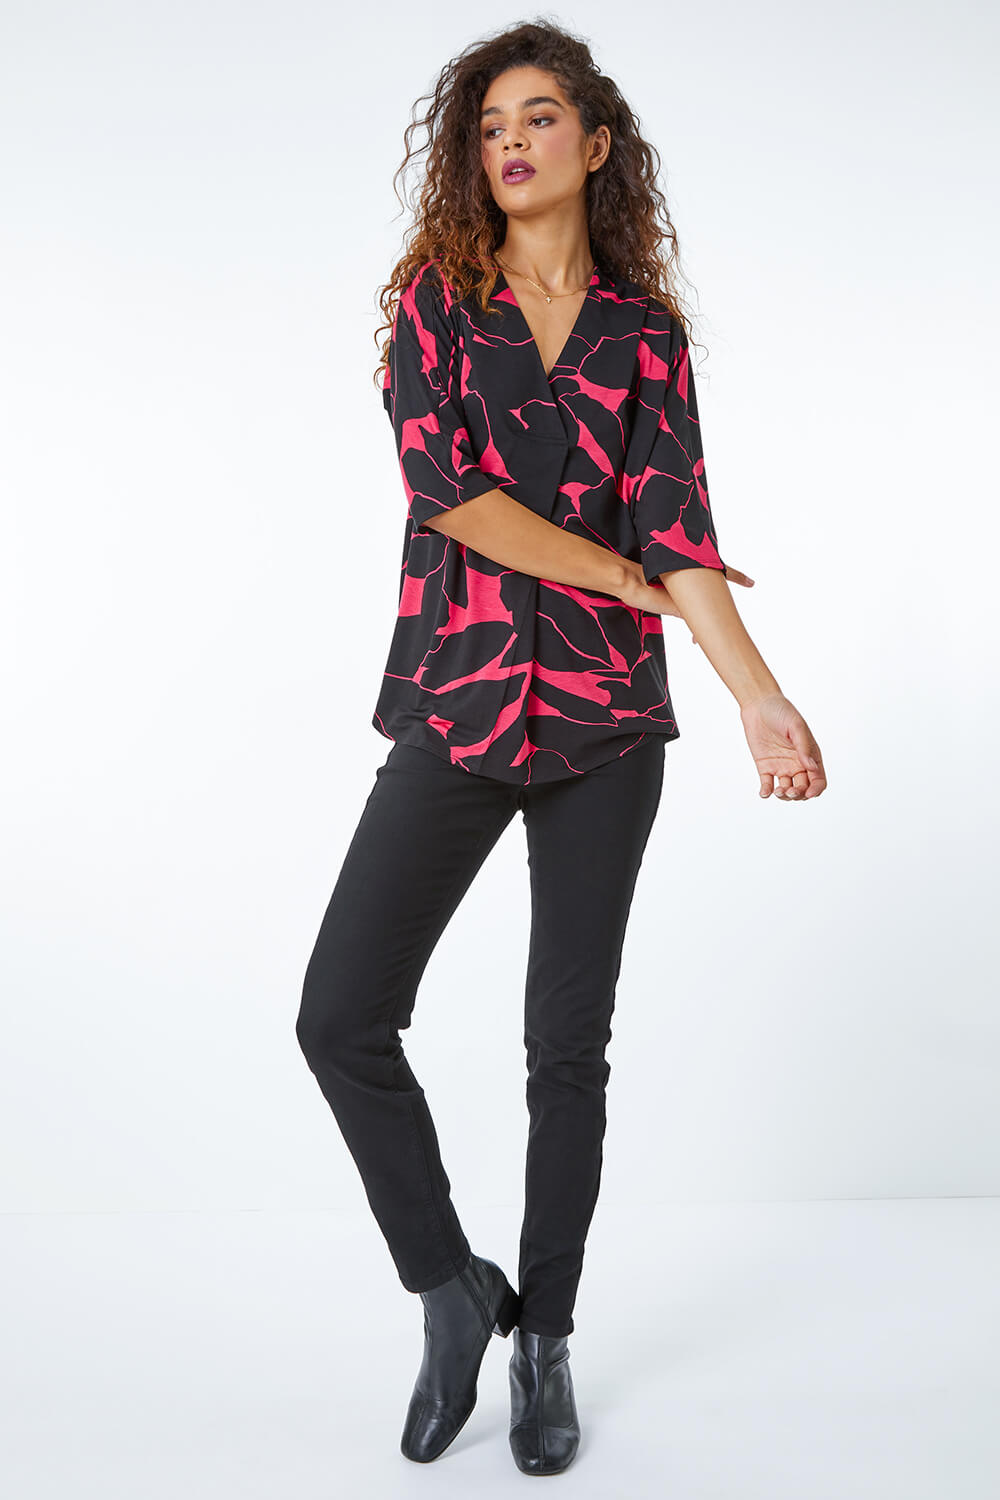 CERISE Floral Print Pleat Front Top, Image 2 of 5